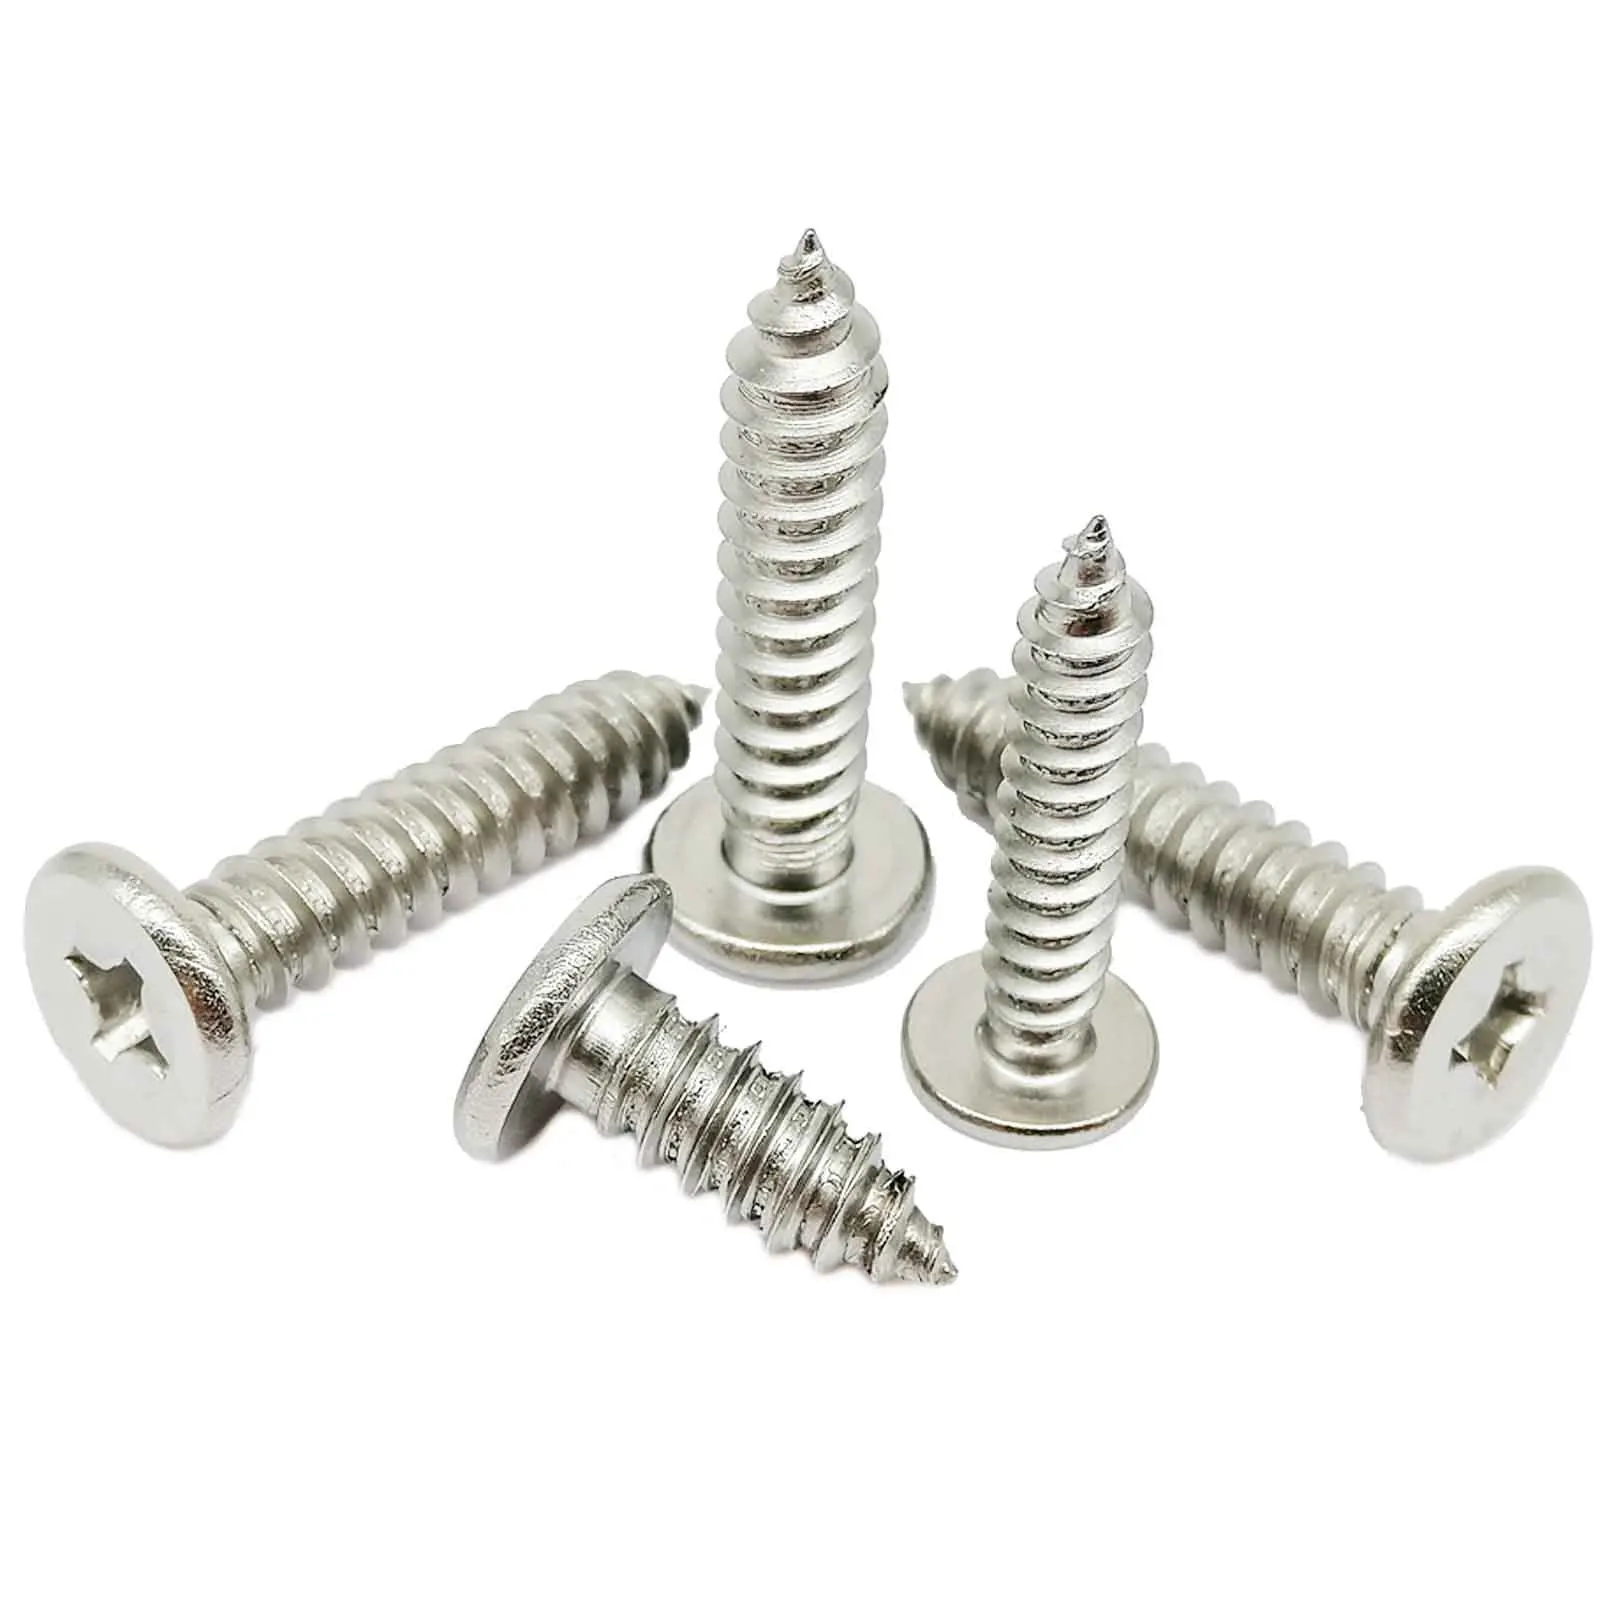 A2 304 Stainless M3.5 M4 M4.2 Phillips Pan Head Sheet Metal Self Tapping Screw 